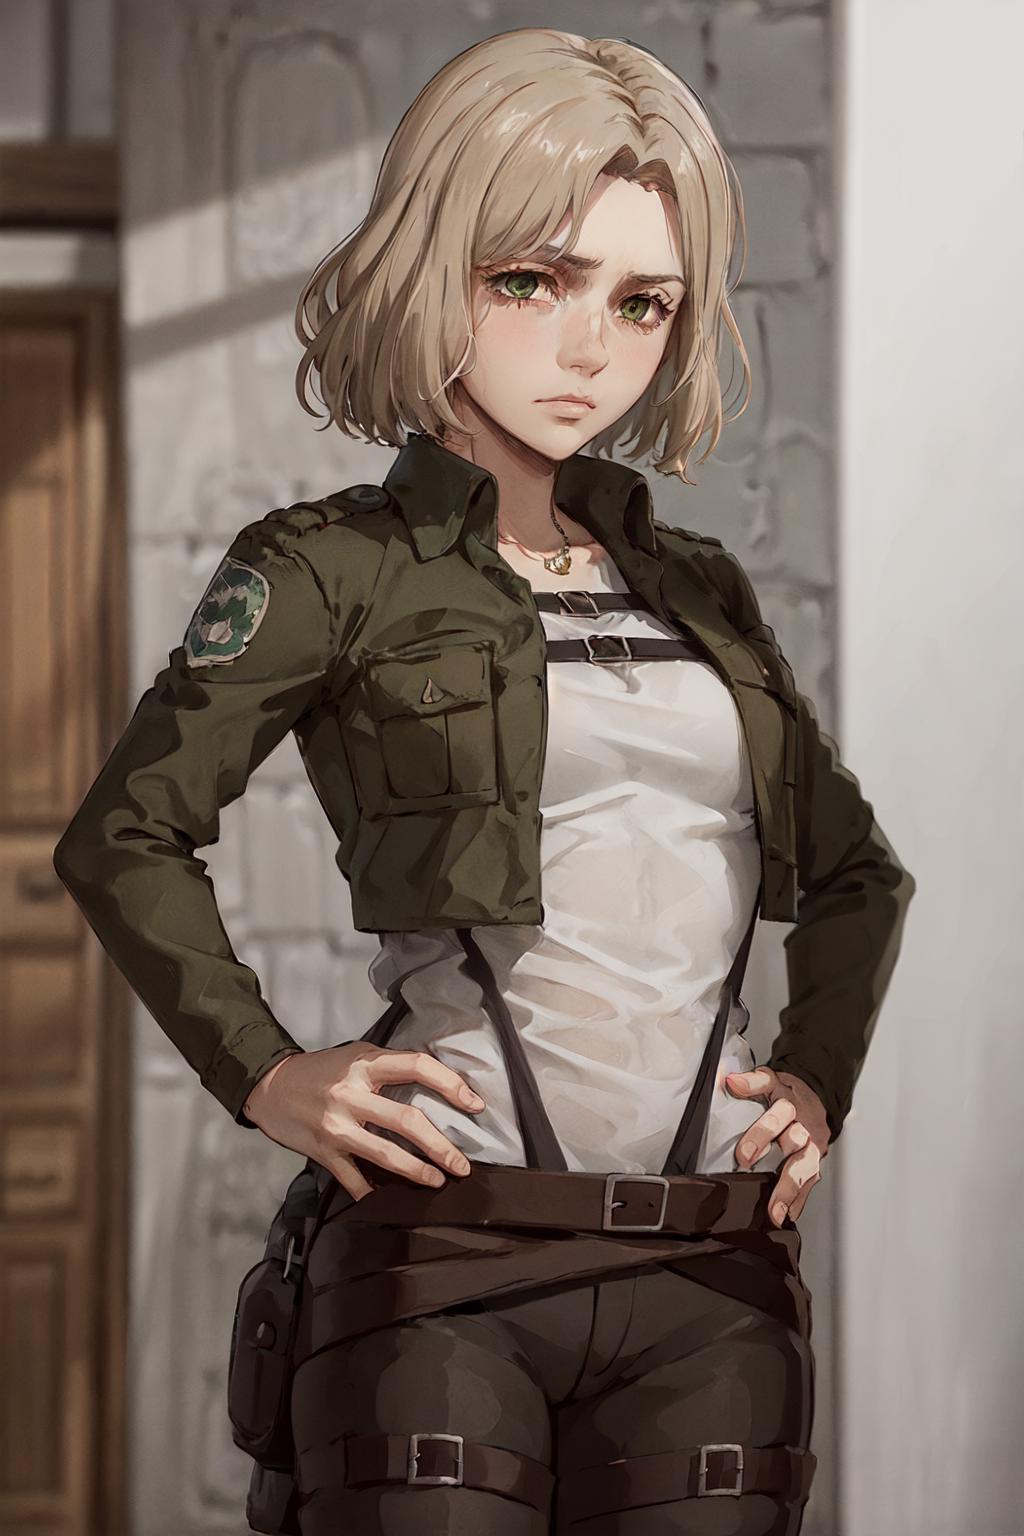 Hitch Dreyse | Attack on Titan image by justTNP